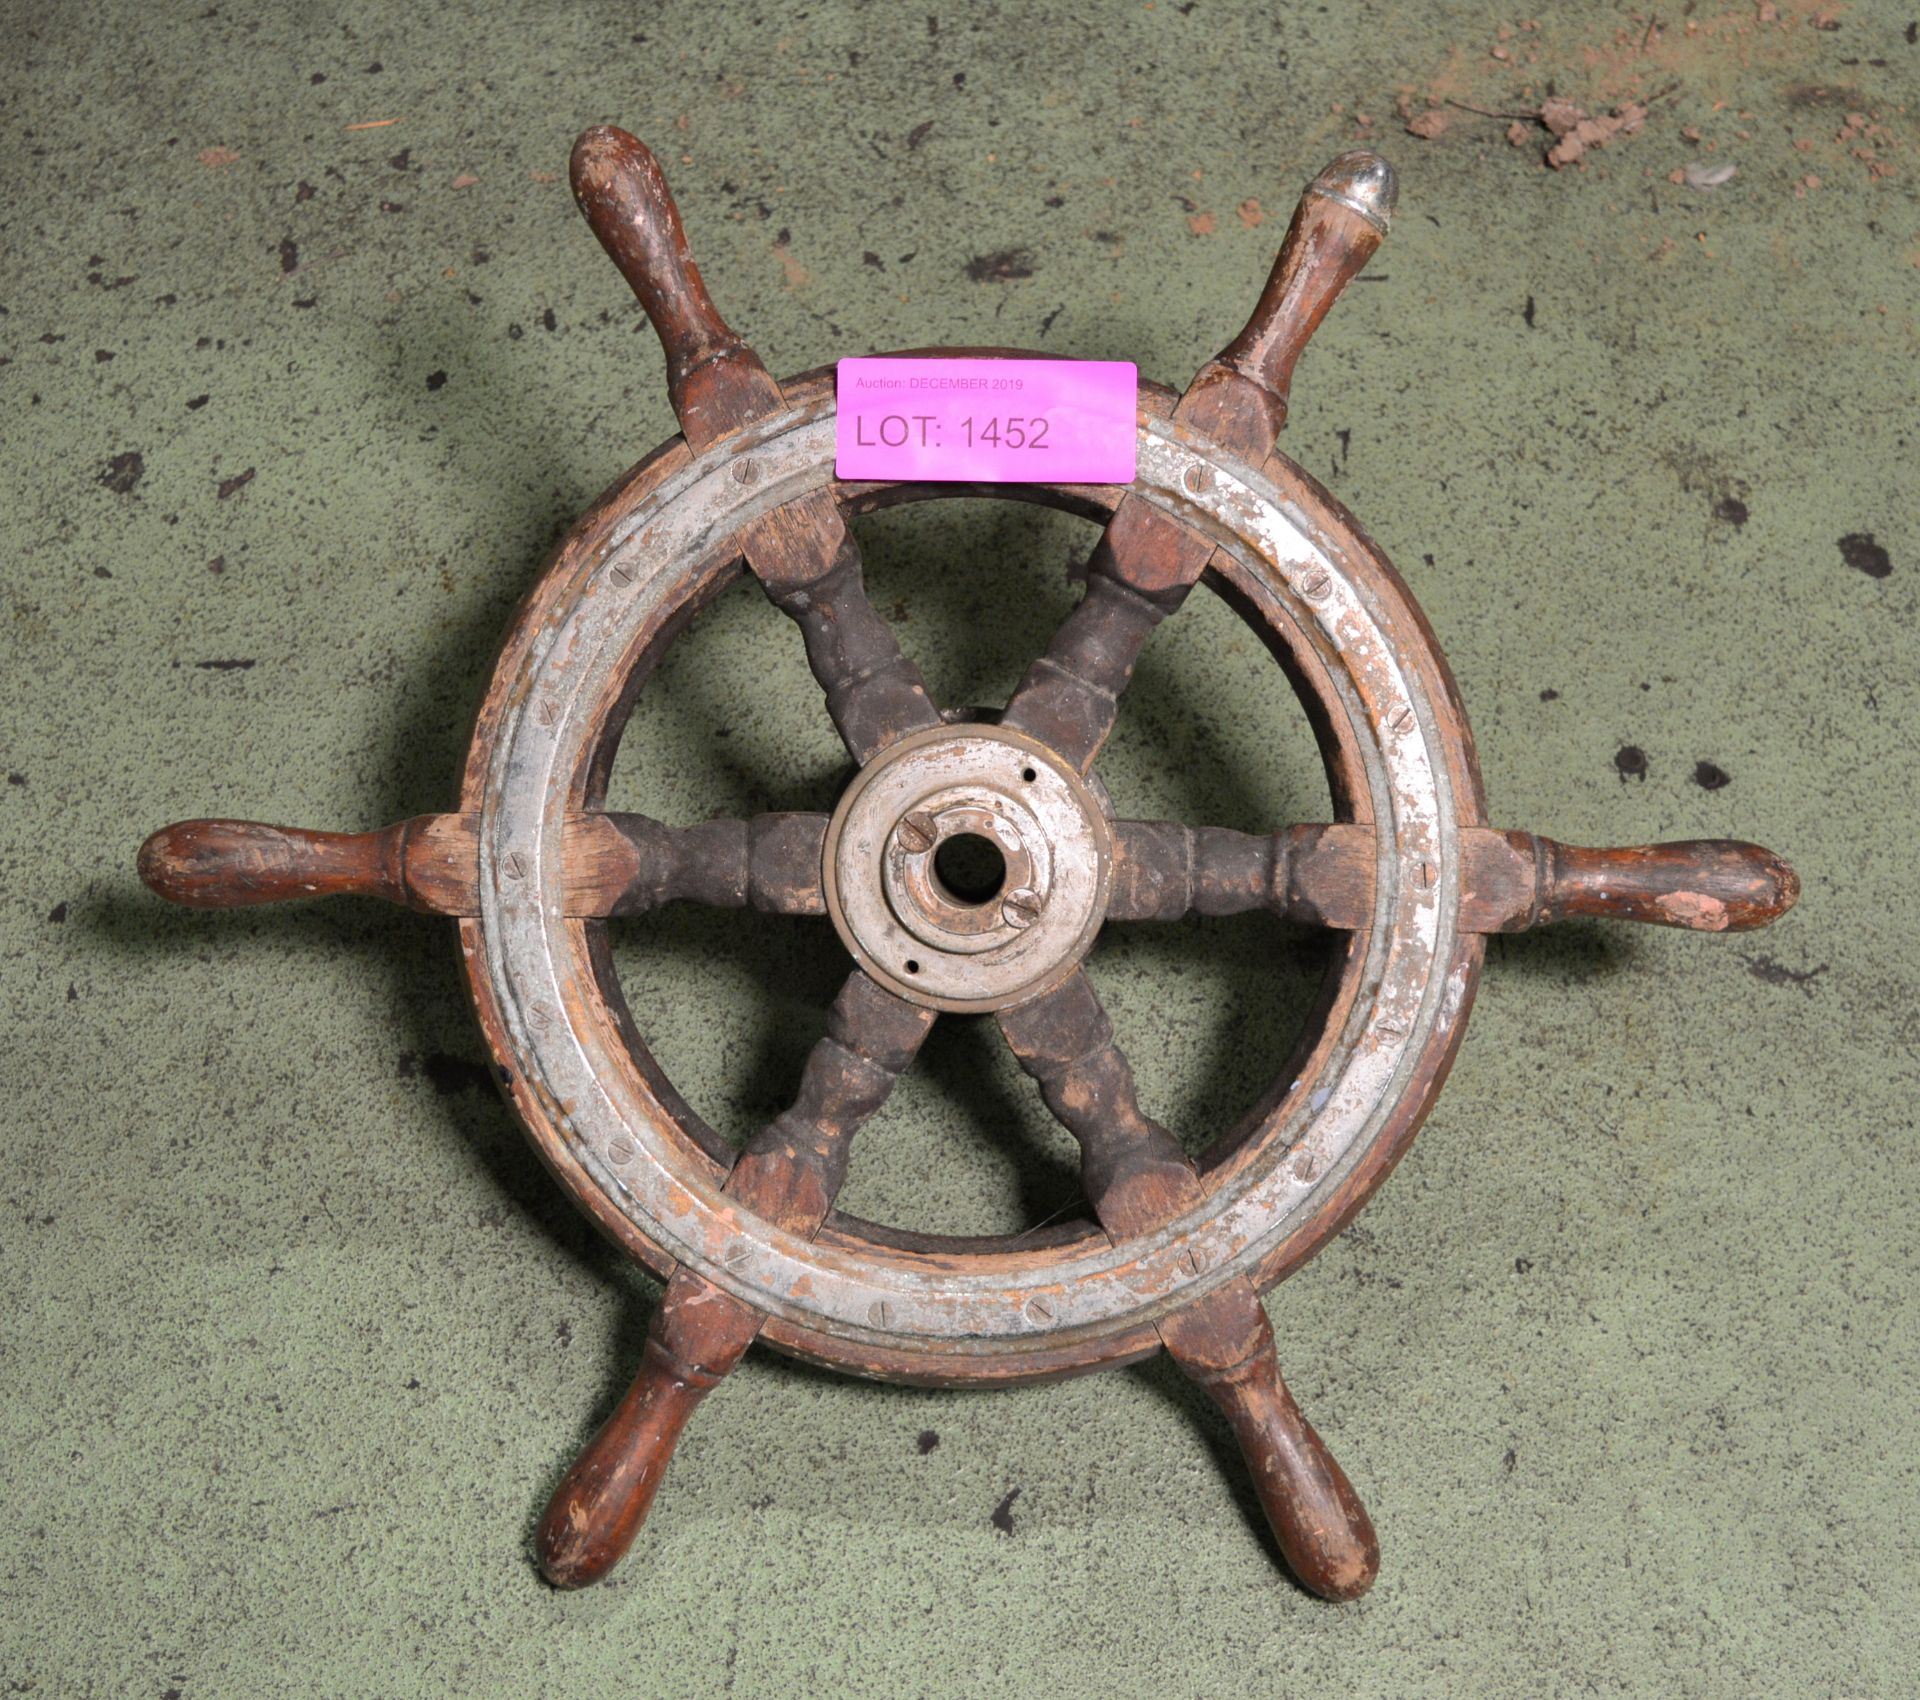 Ship's Wheel - Salvaged from MV Alice on River Thames.